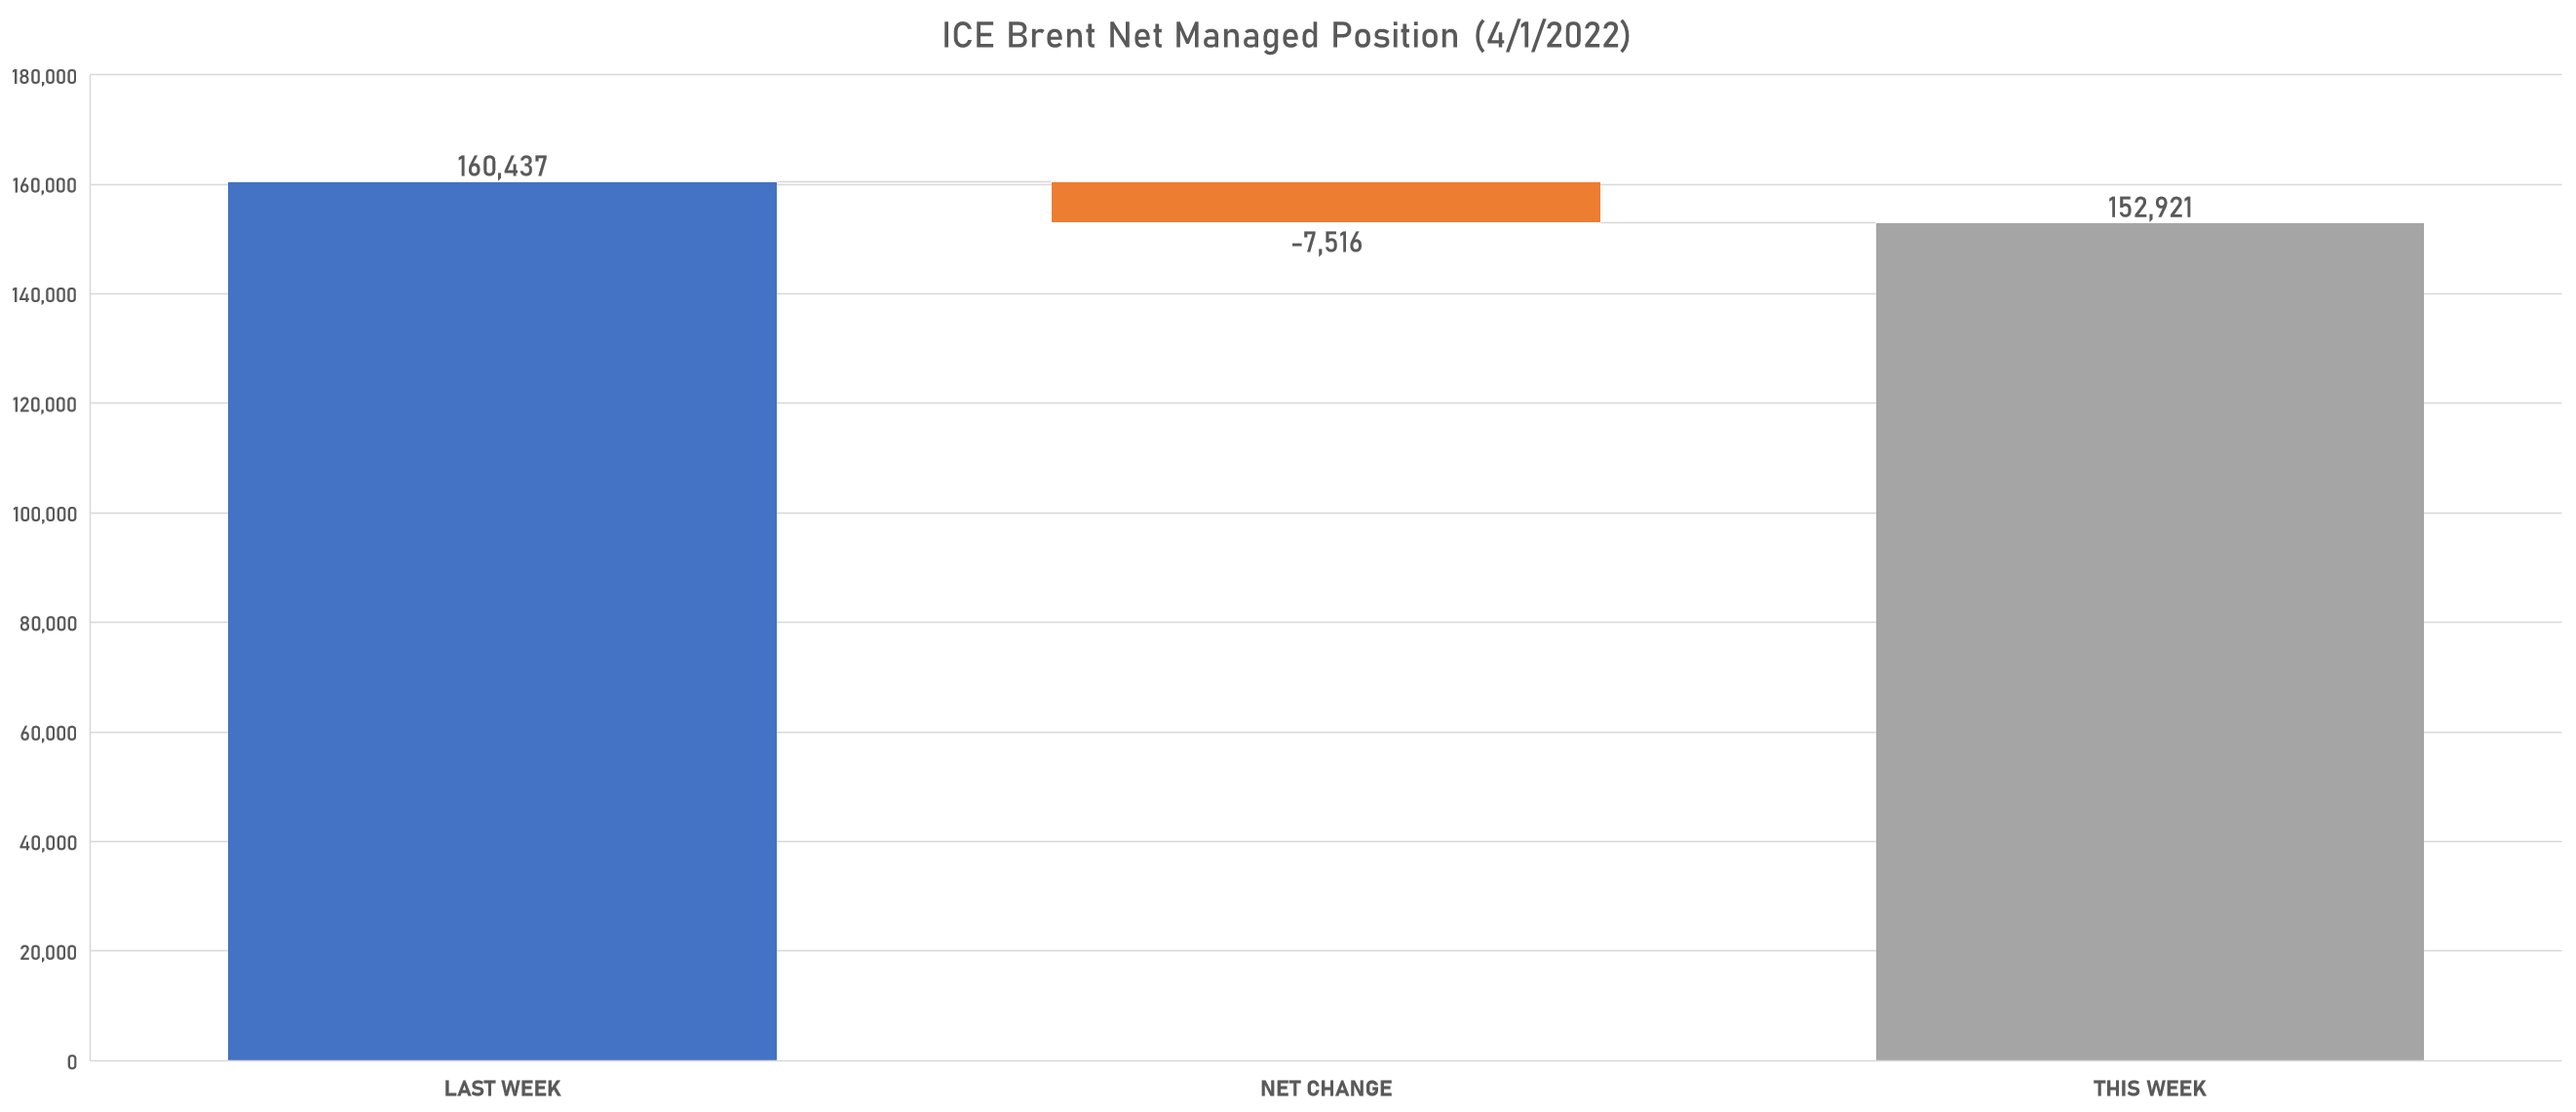 ICE Brent Net Managed Positioning | Sources: phipost.com, Refinitiv data